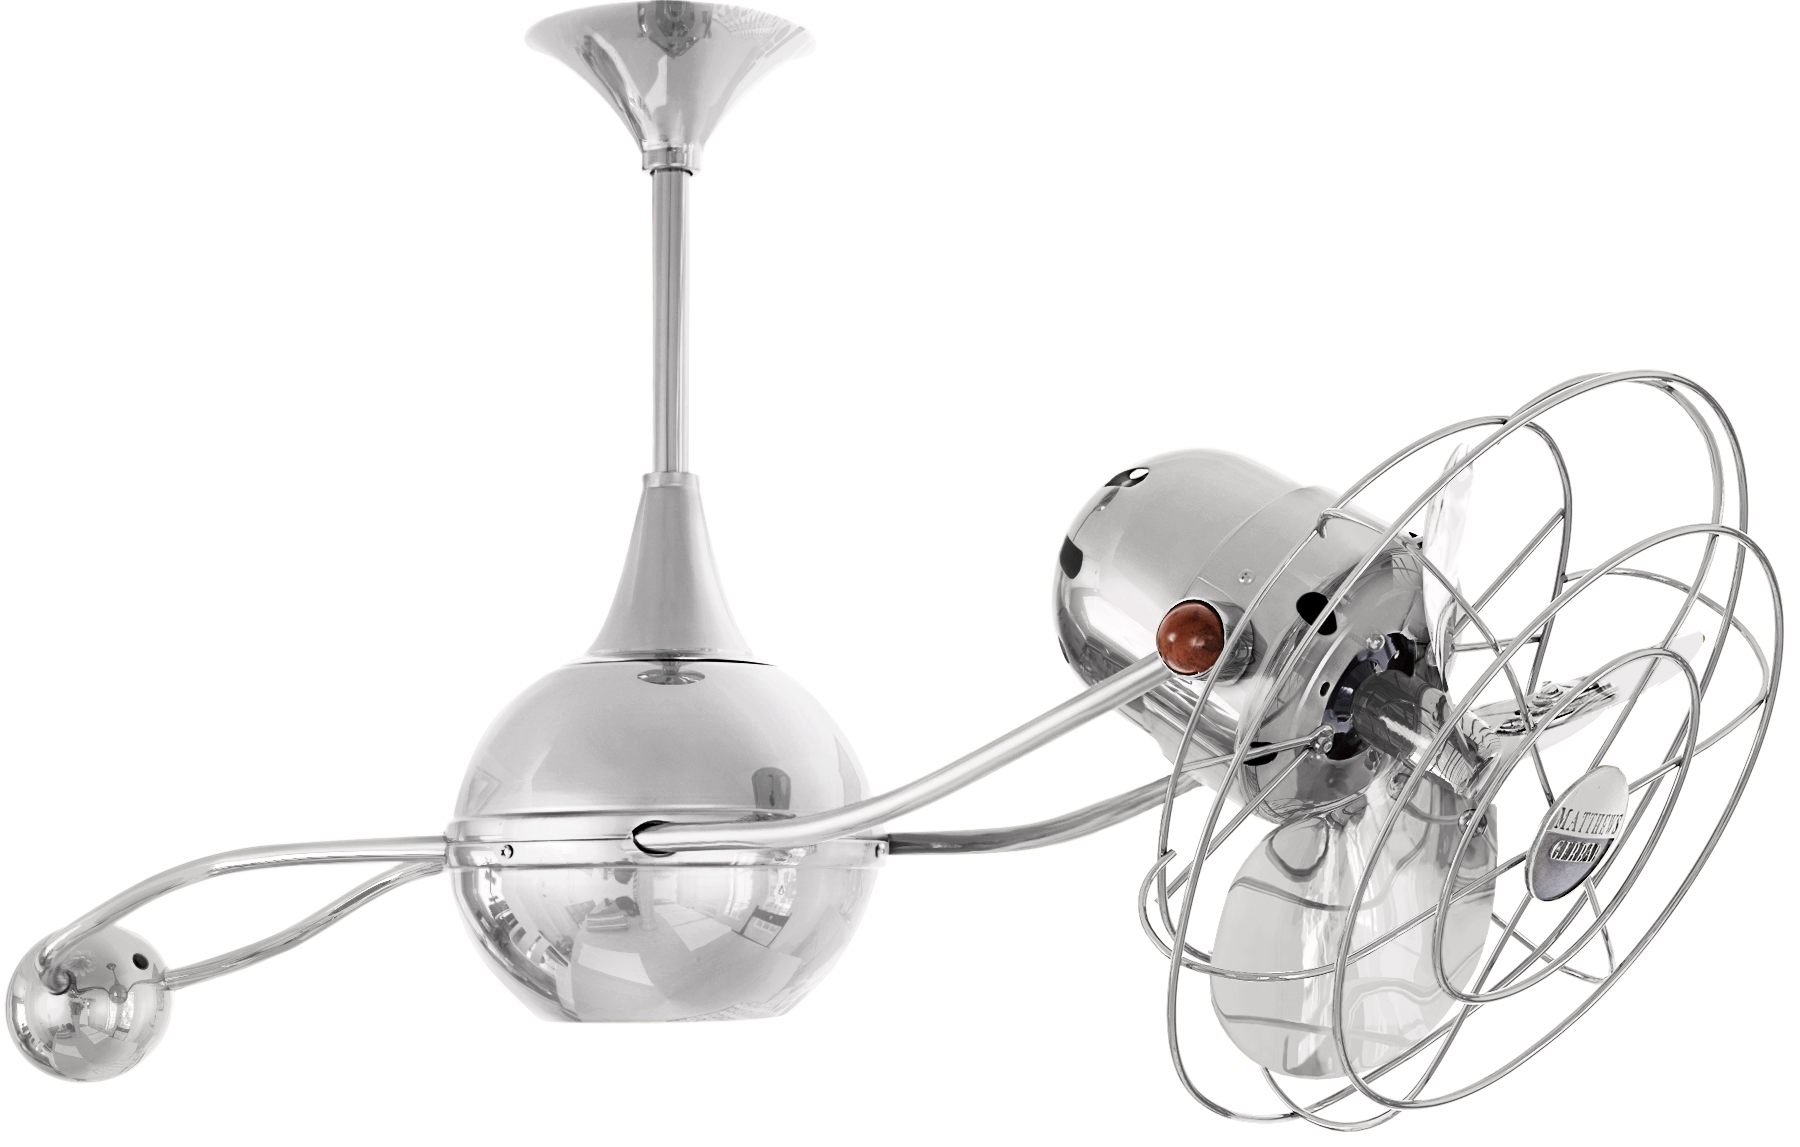 Brisa 2000 ceiling fan in polished chrome finish with metal blades in decorative cage made by Matthews Fan Company.